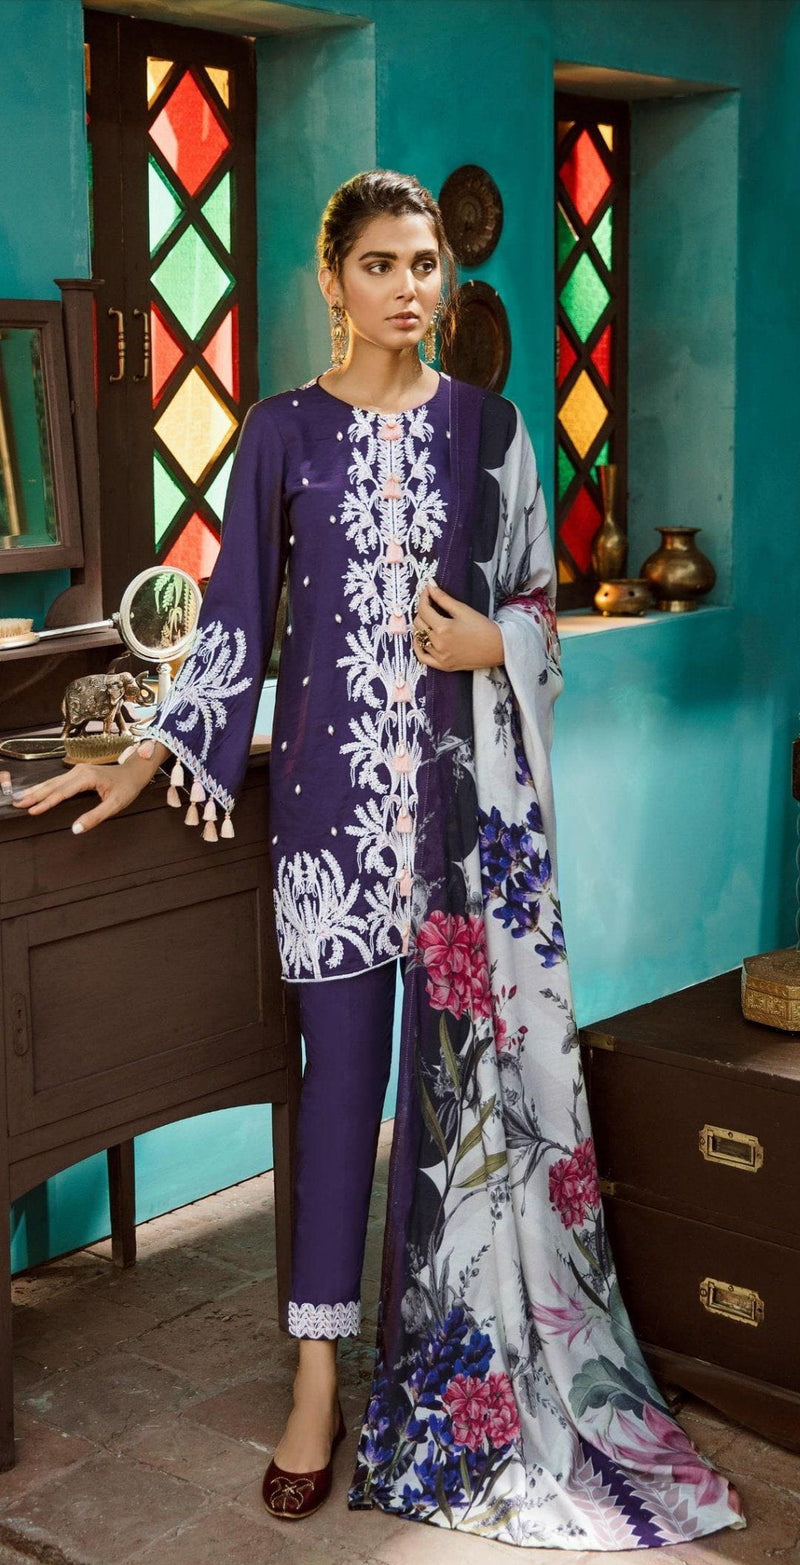 img_cross_stitch_fall_winter_angan_cotton_satin_collection_awwal_boutique